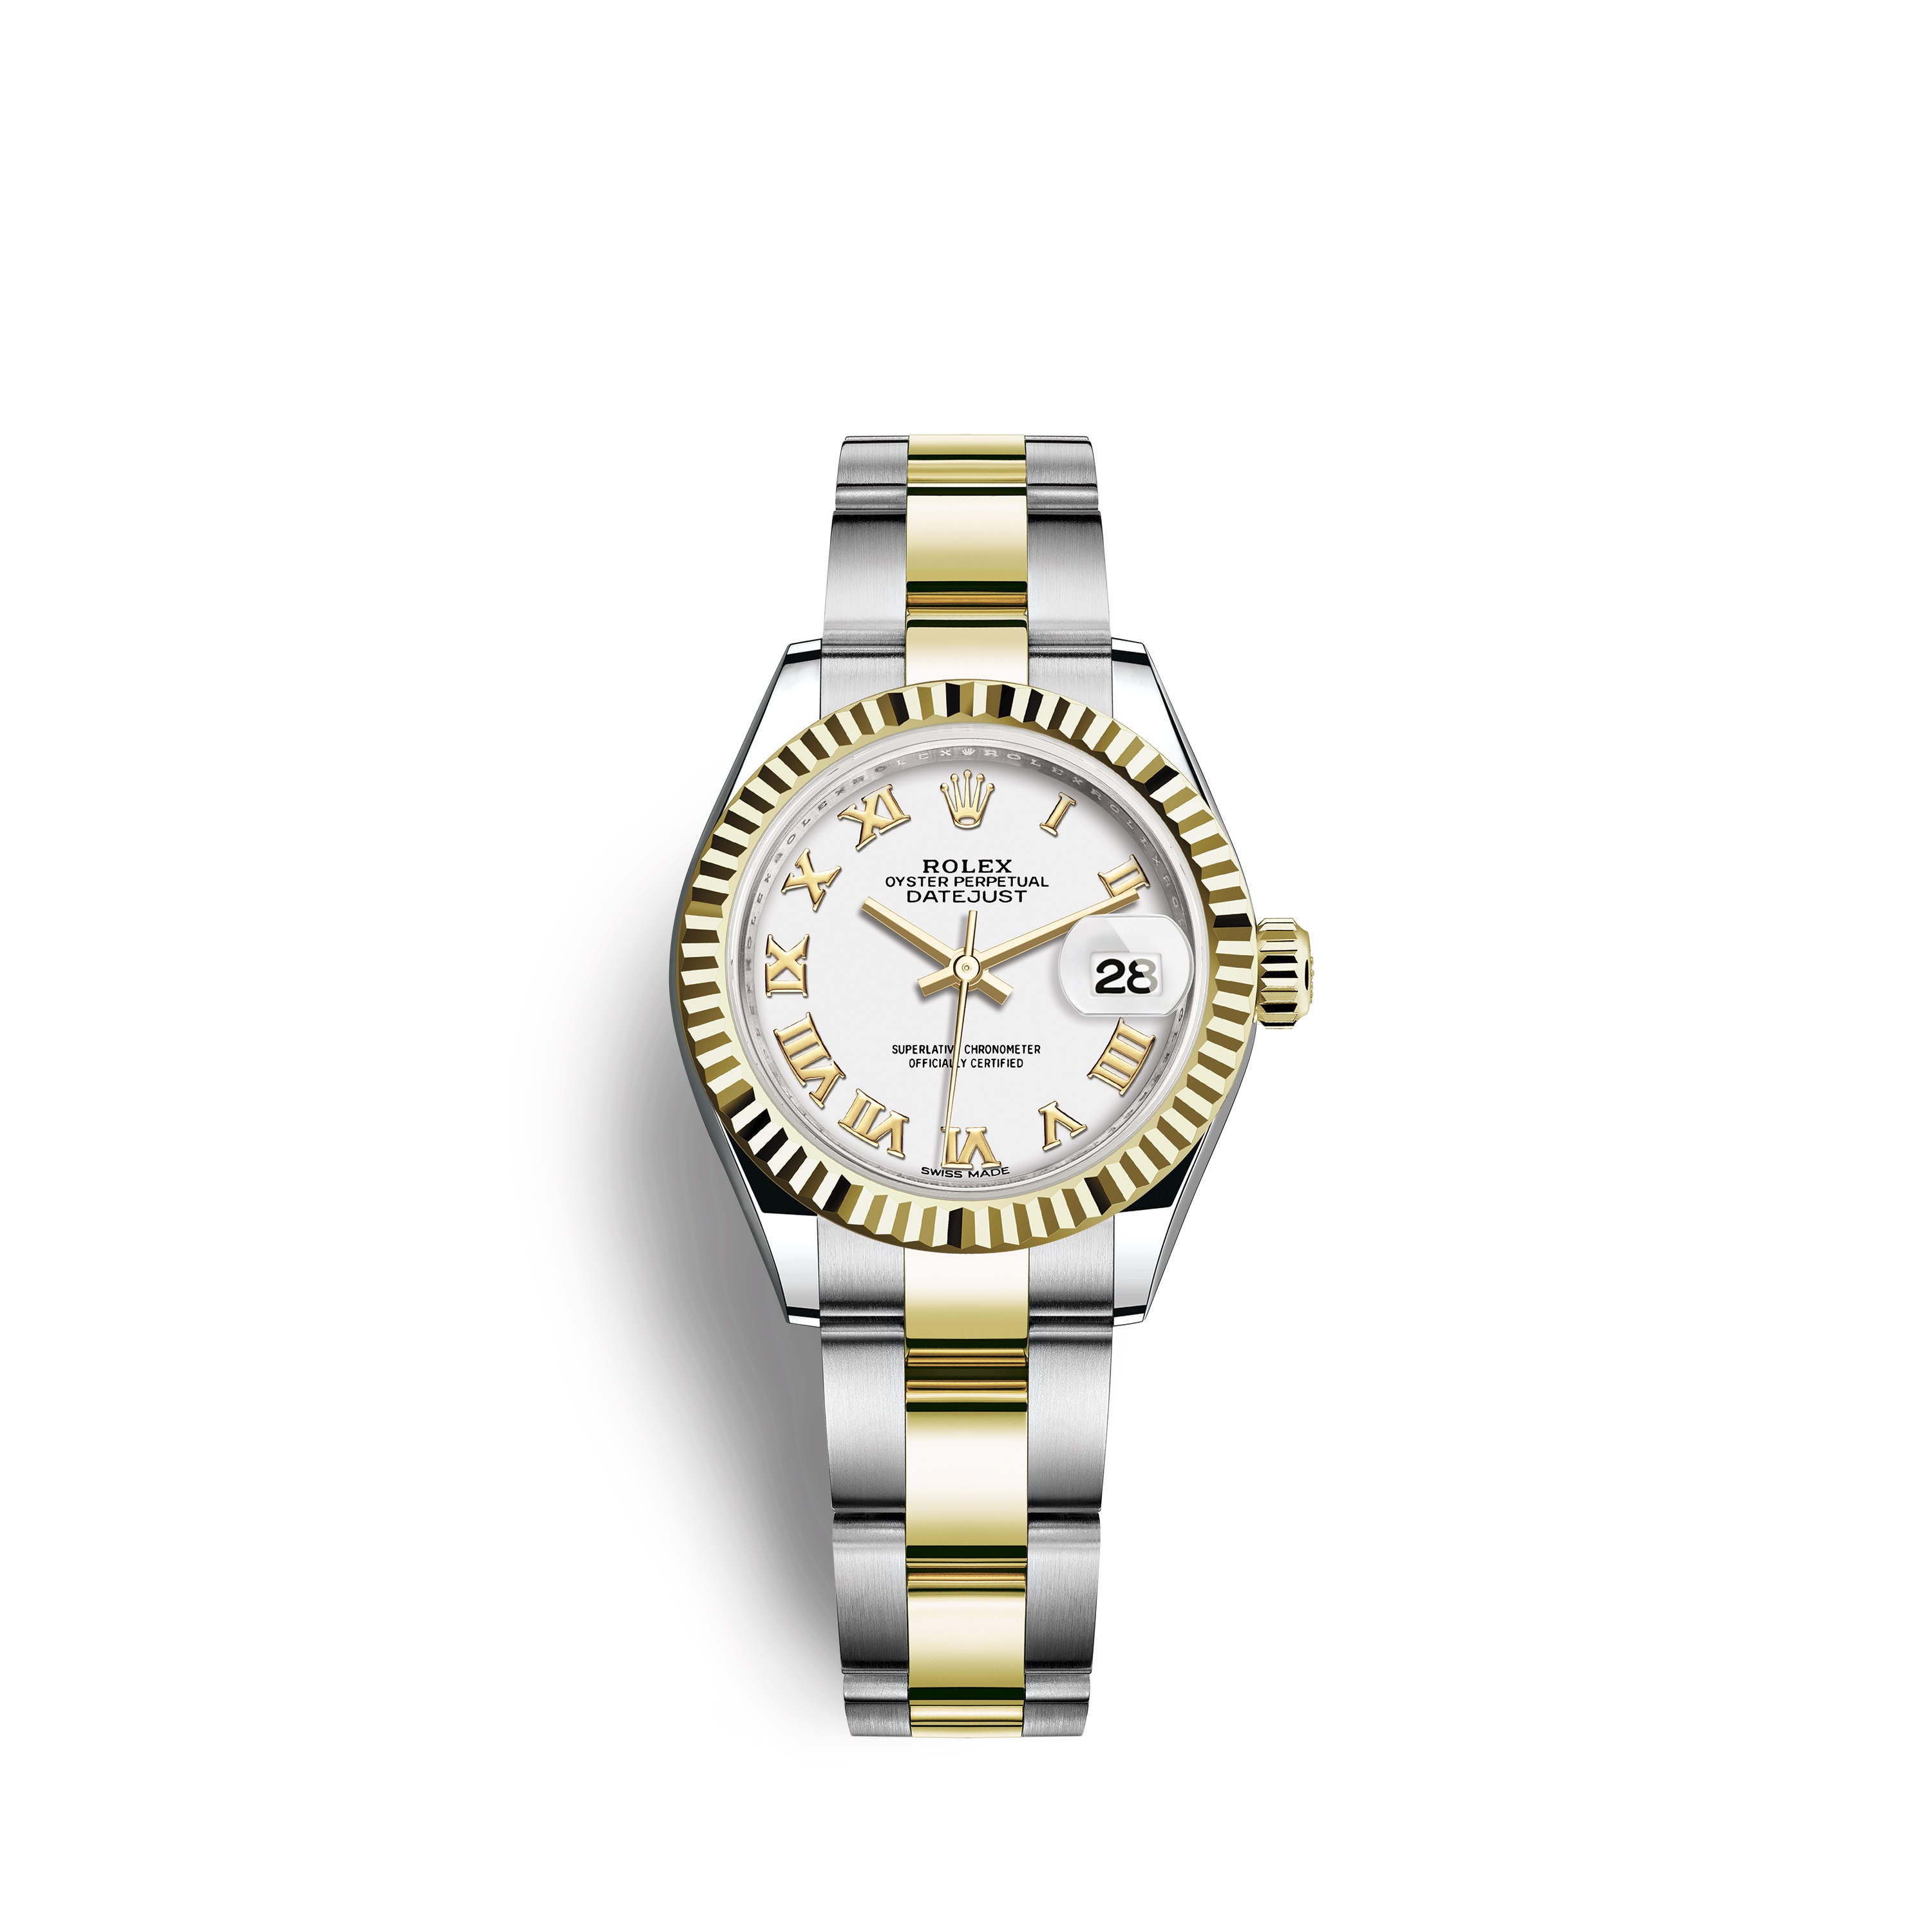 Lady-Datejust 28 279173 Gold & Stainless Steel Watch (White)